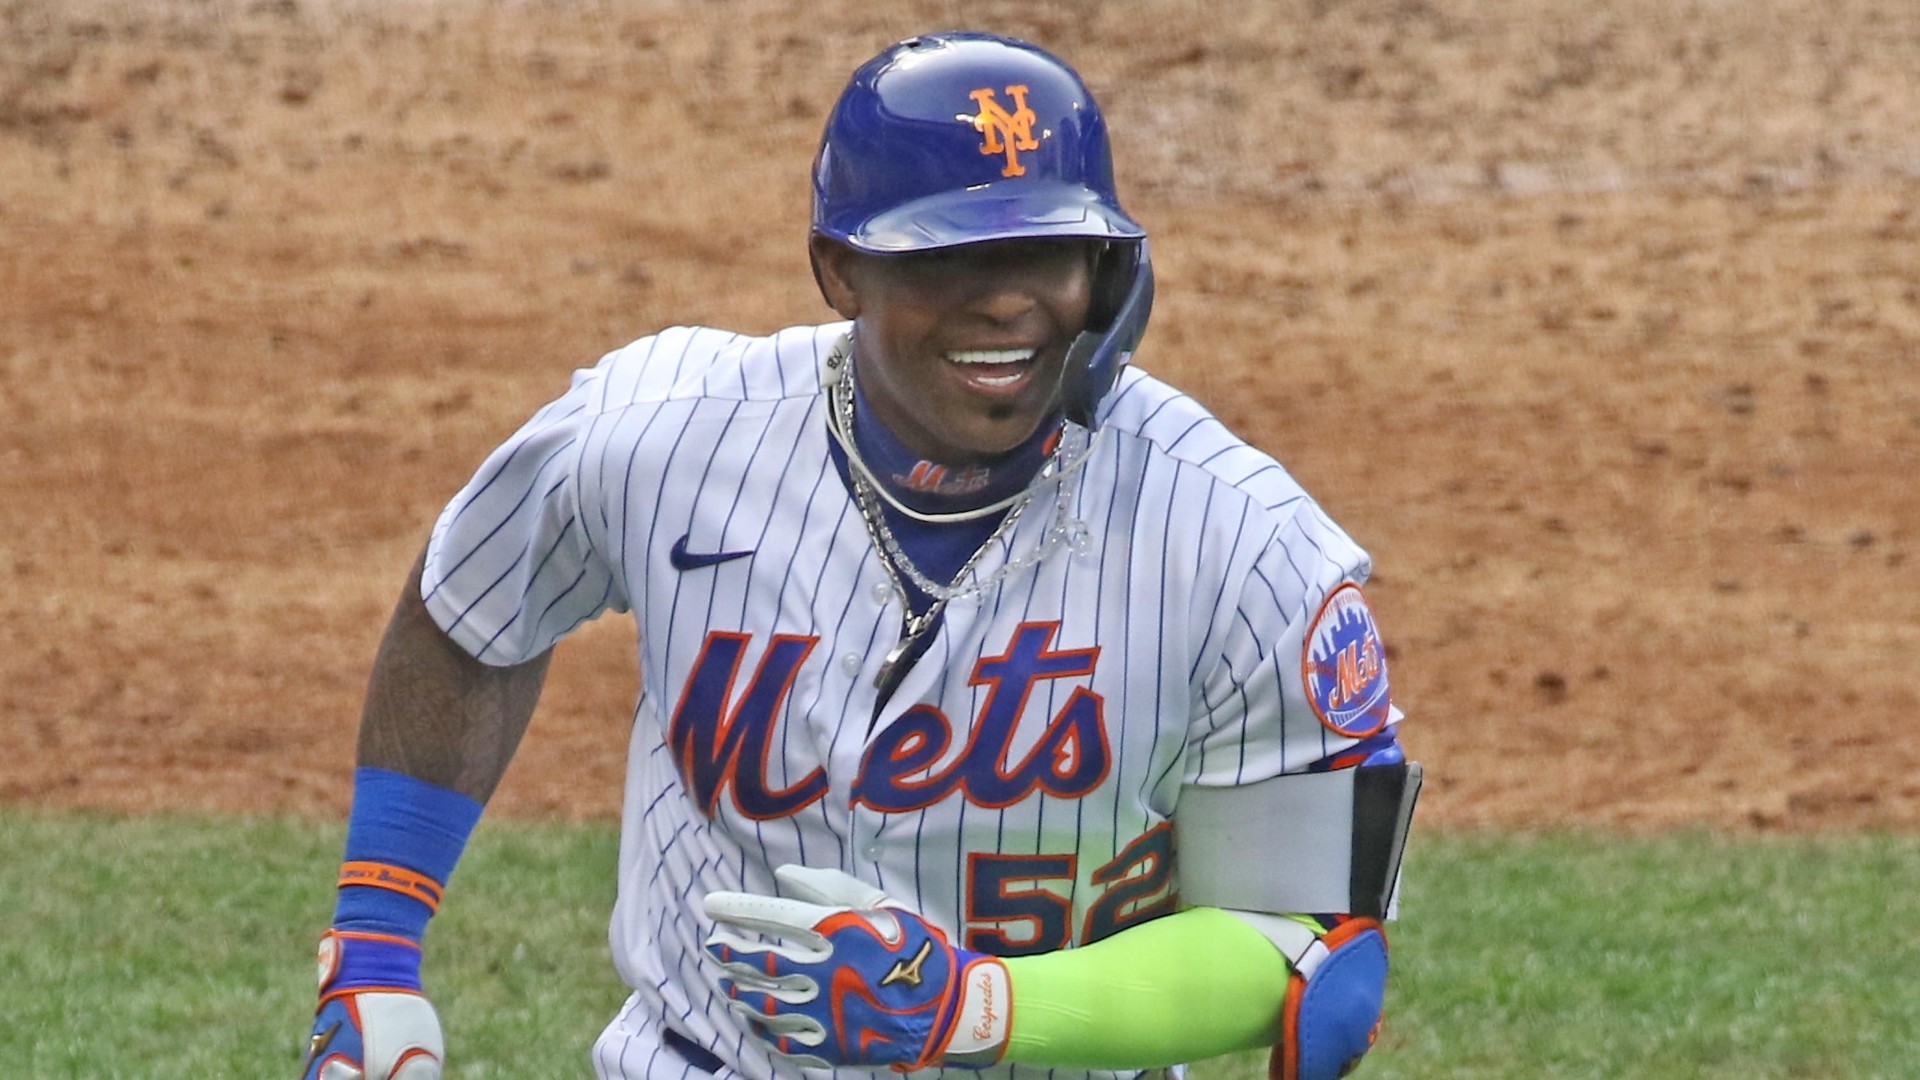 The Mets Found Yoenis Céspedes and He's Decided to Opt Out of the 2020 Season